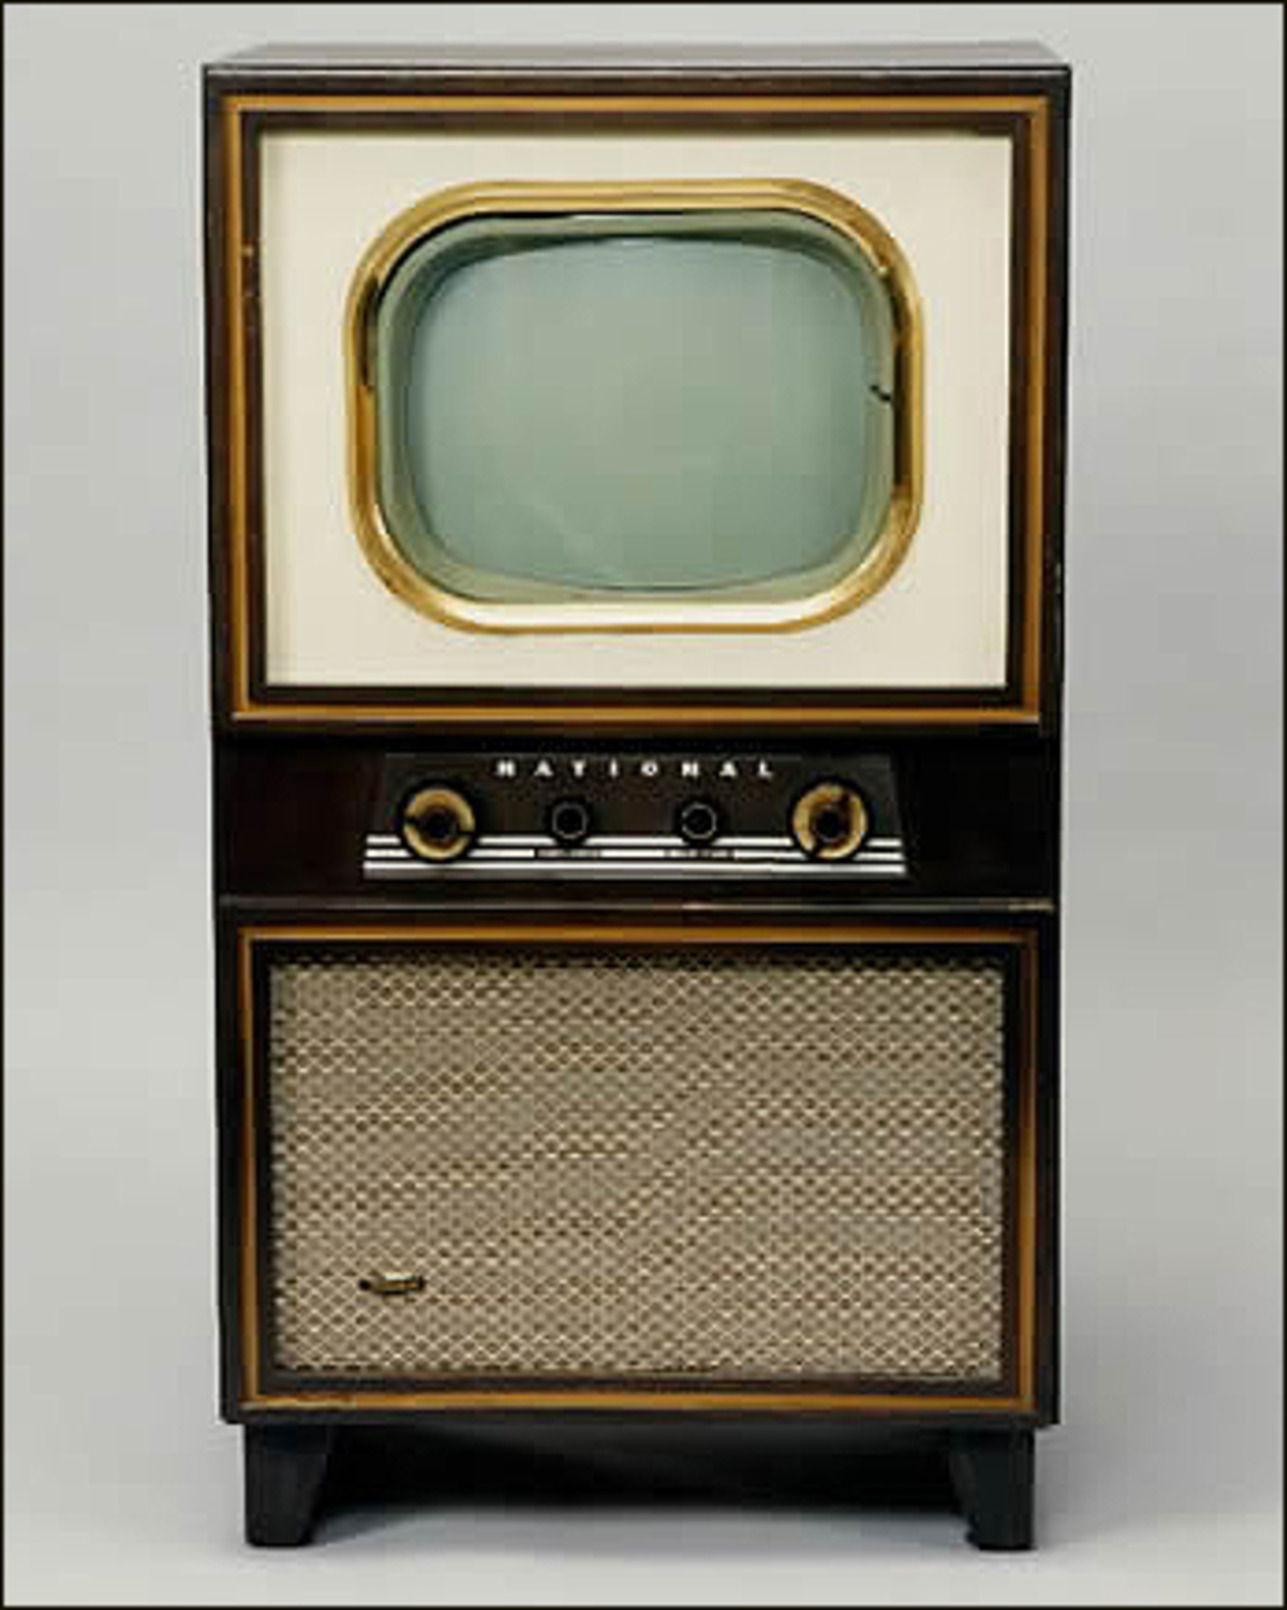 Vintage Television Sets Entertain Many Collectors Features Entertainment Herald